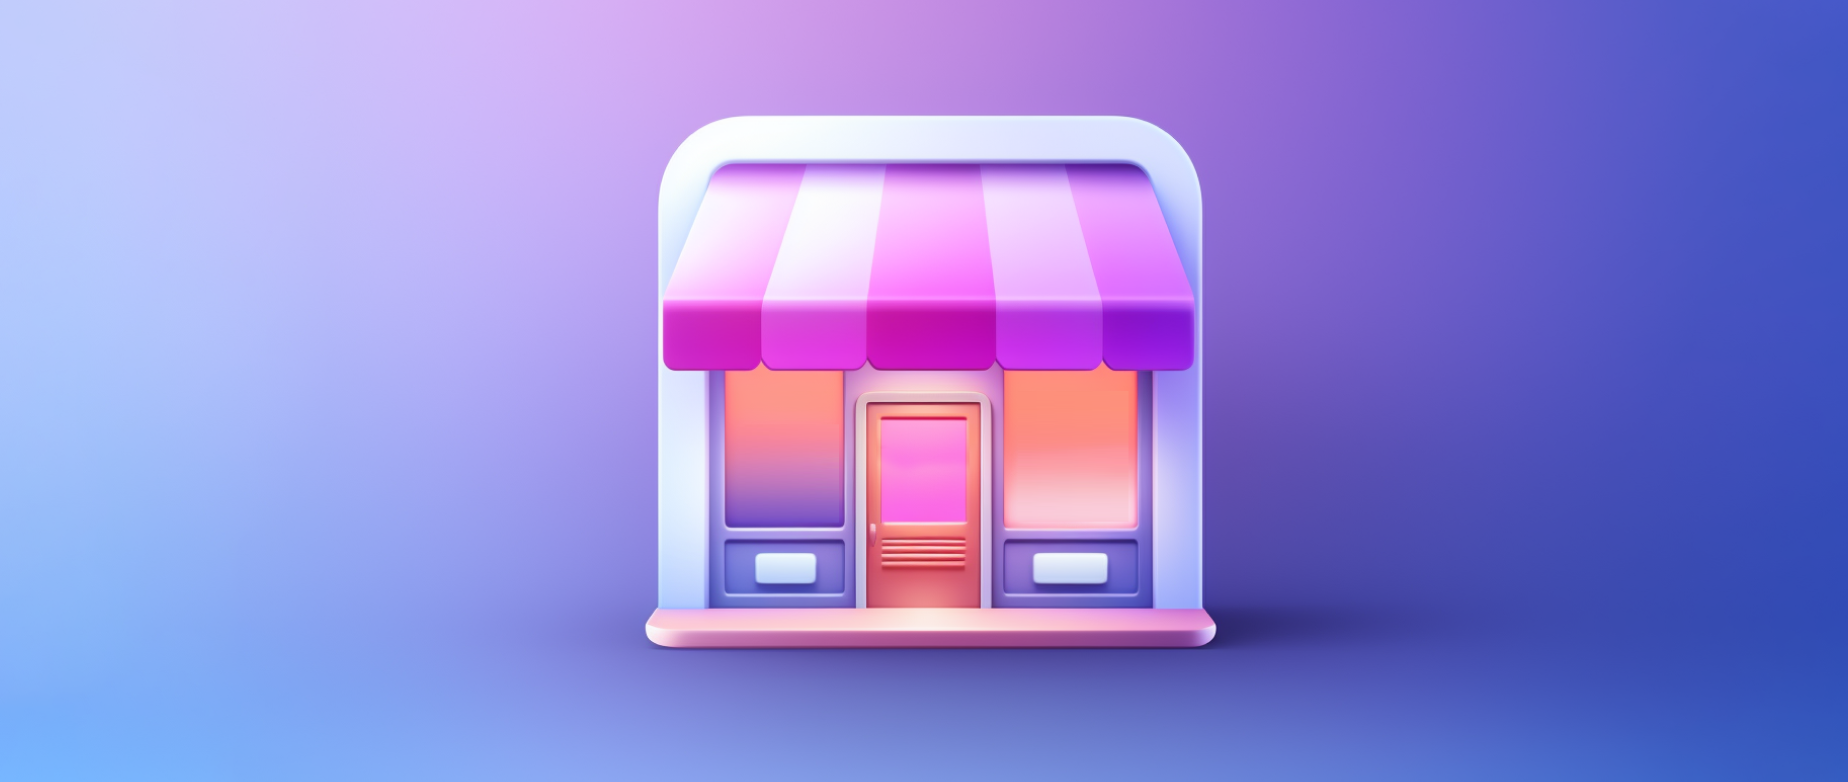 A pink and orange store front on a blue purple background.